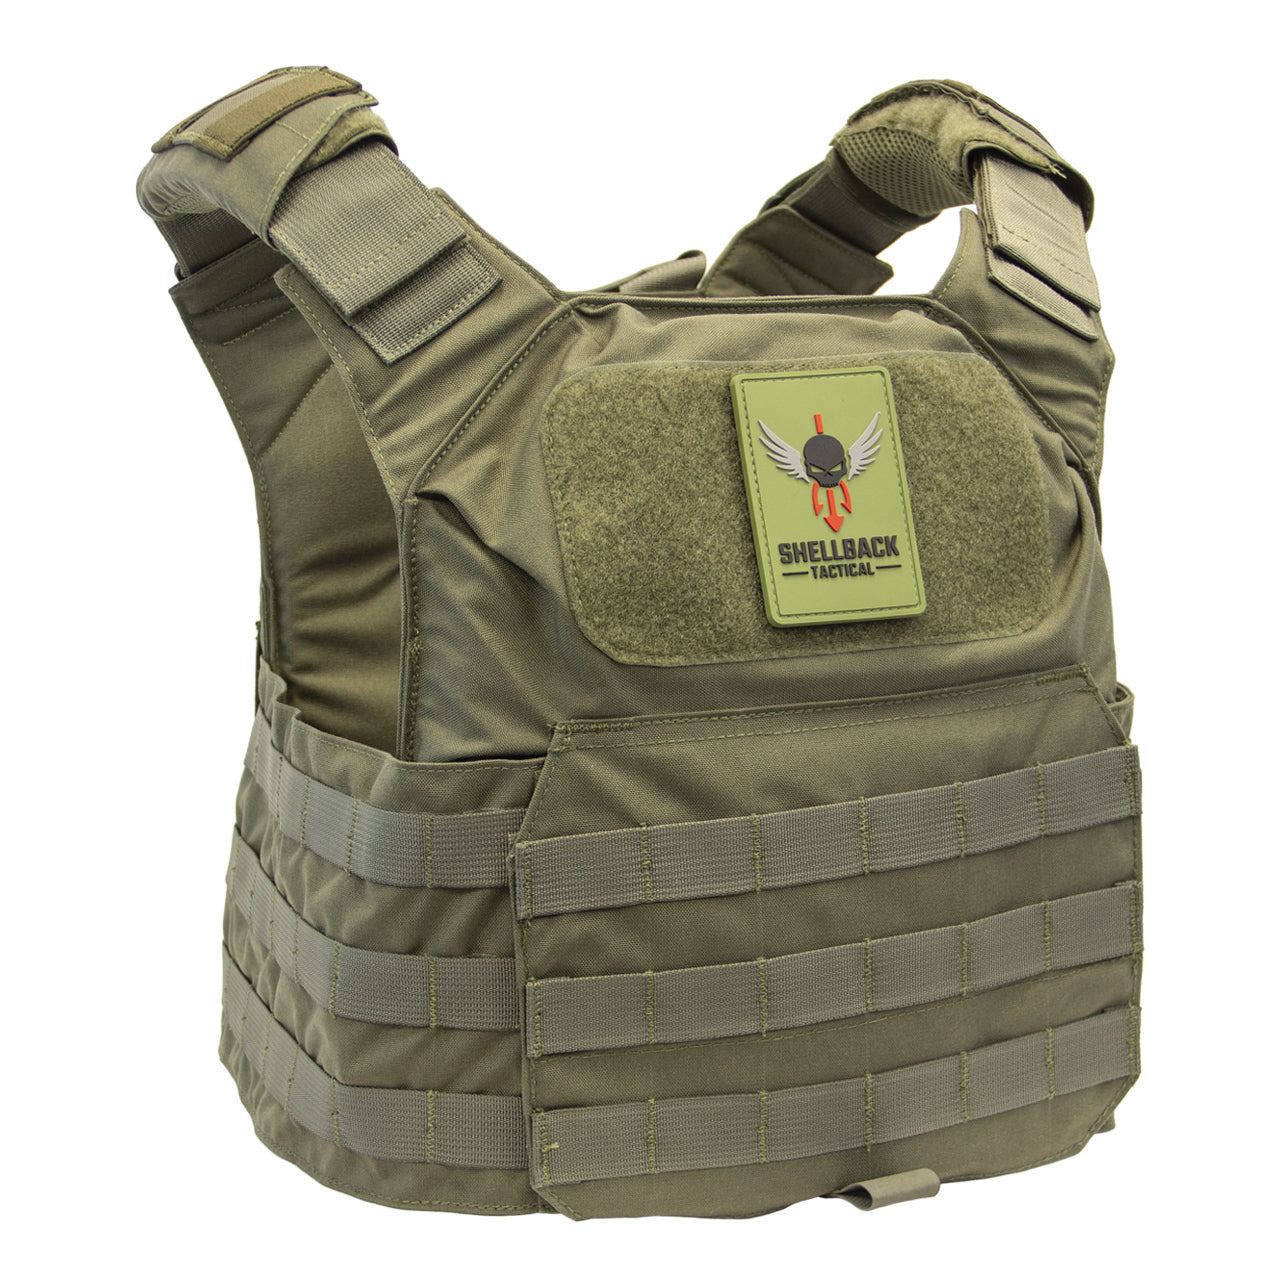 A Shellback Tactical Patriot Plate Carrier with an eagle on it.